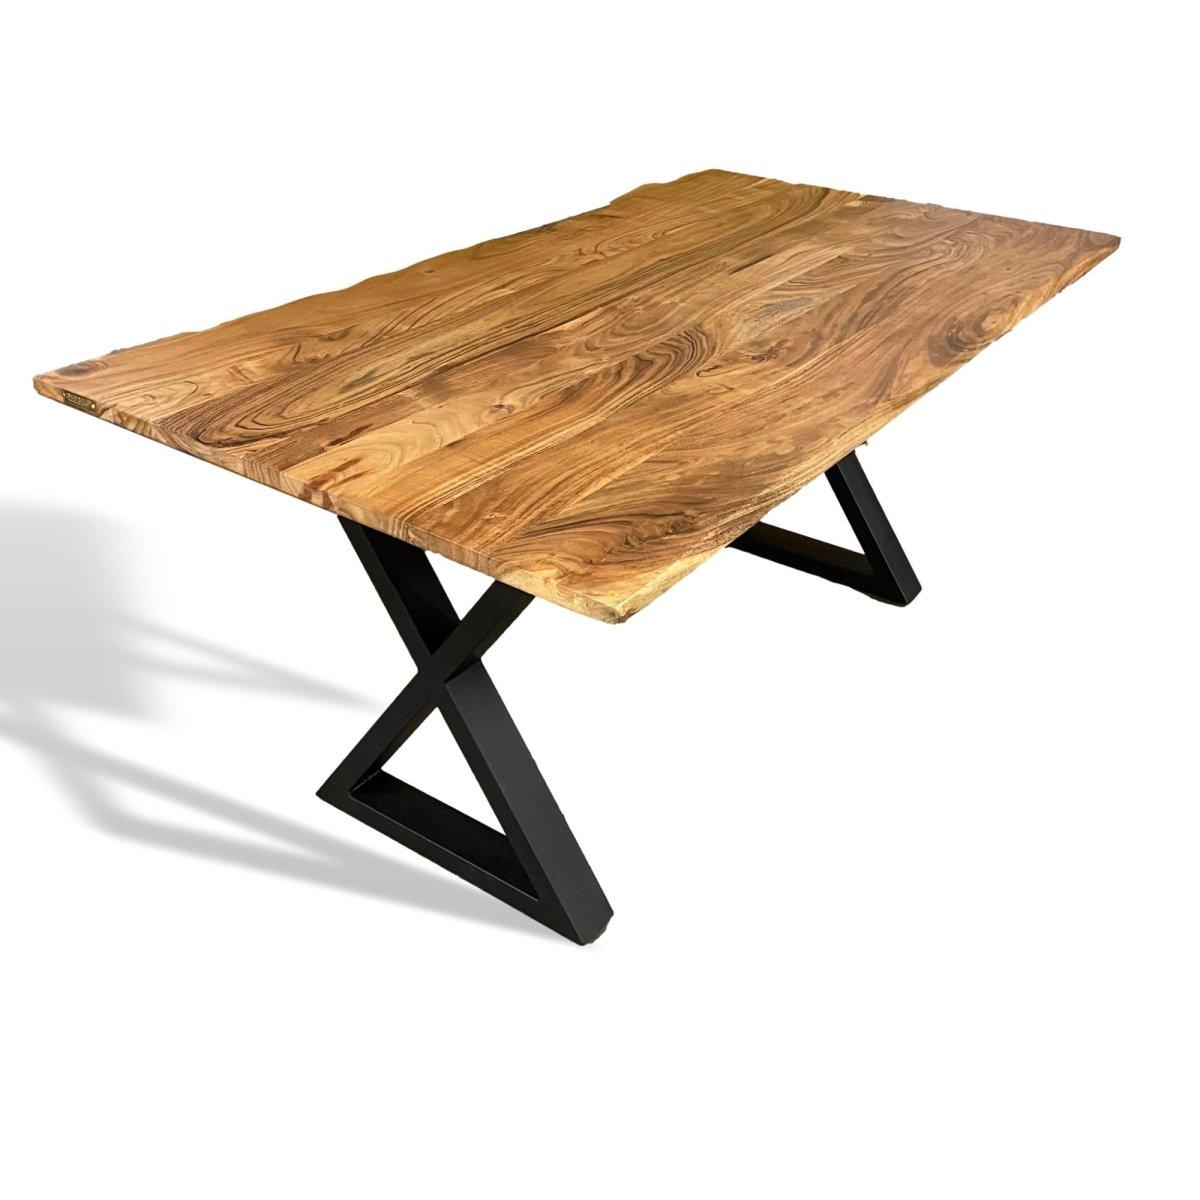 67 inch Darwin Acacia Wood dining table with X legs - Rustic Furniture Outlet